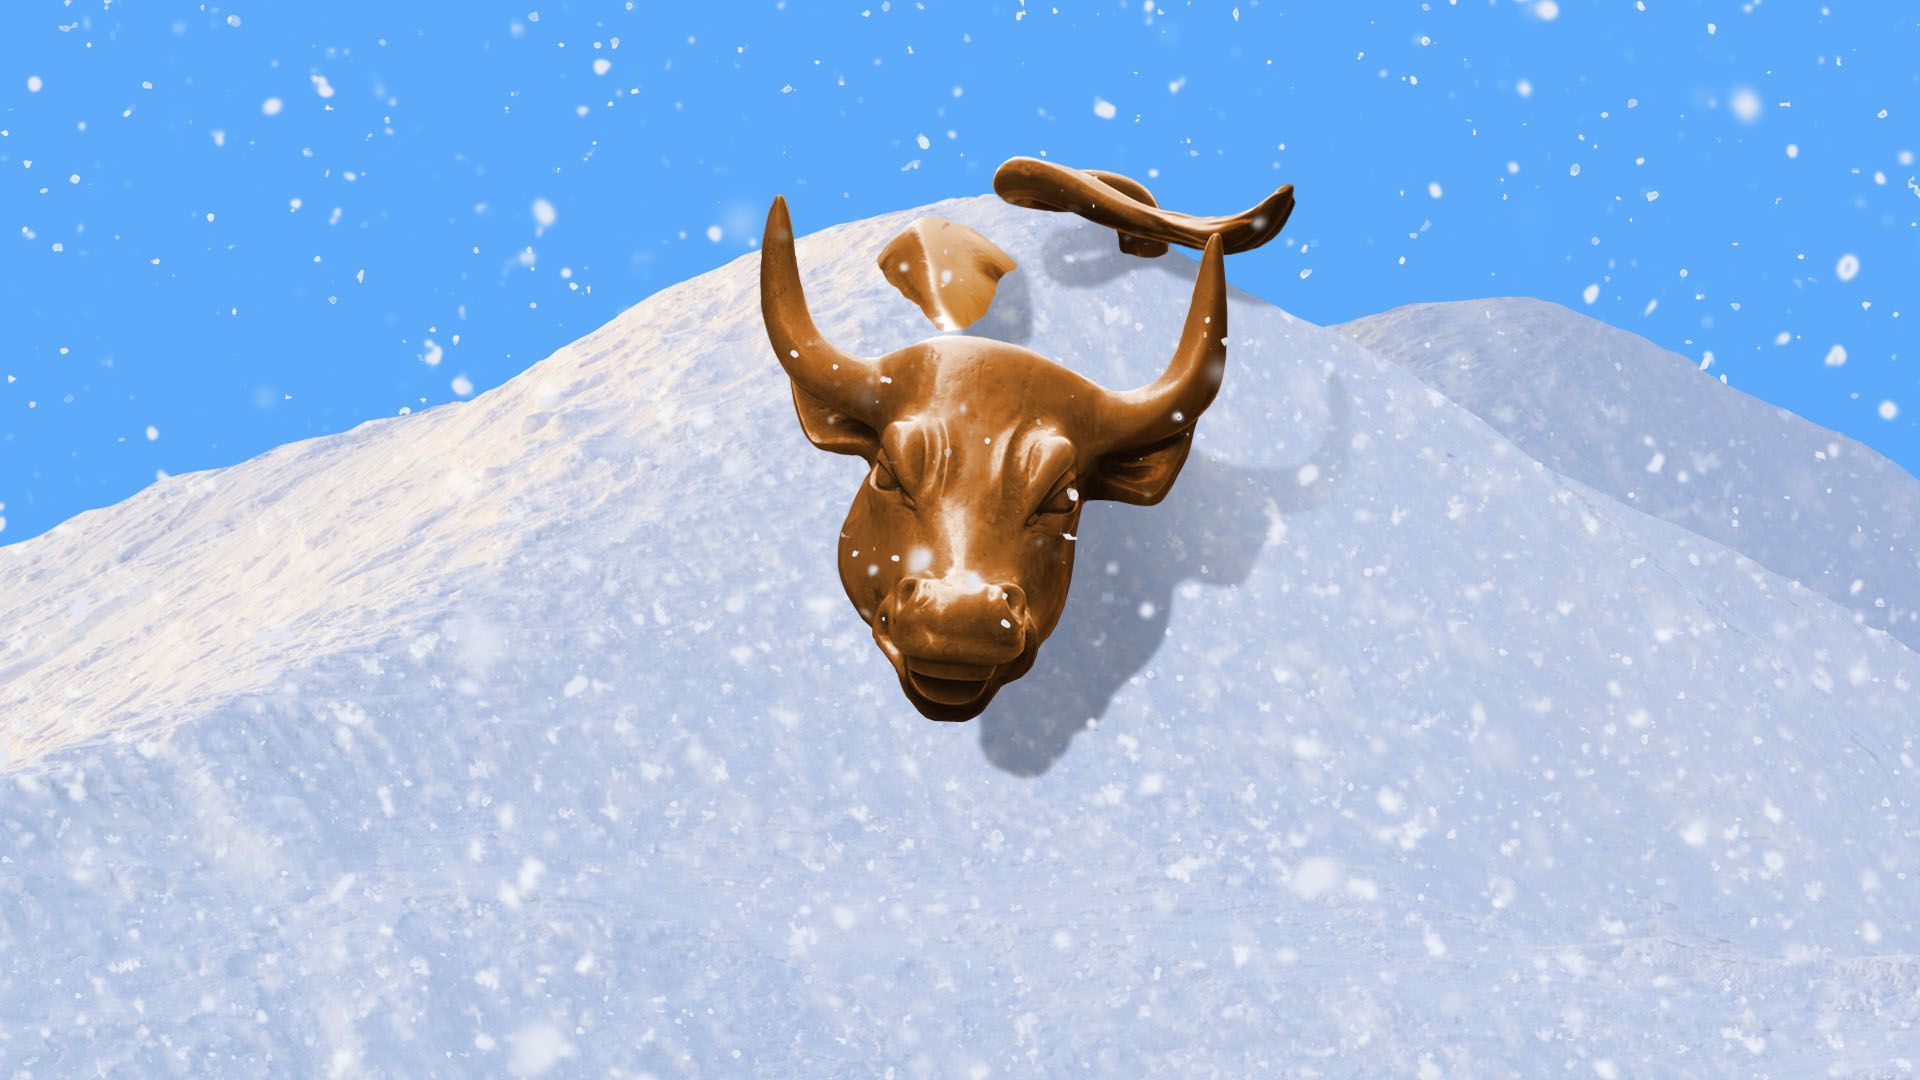 Illustration of the Wall Street Bull statue buried in snow